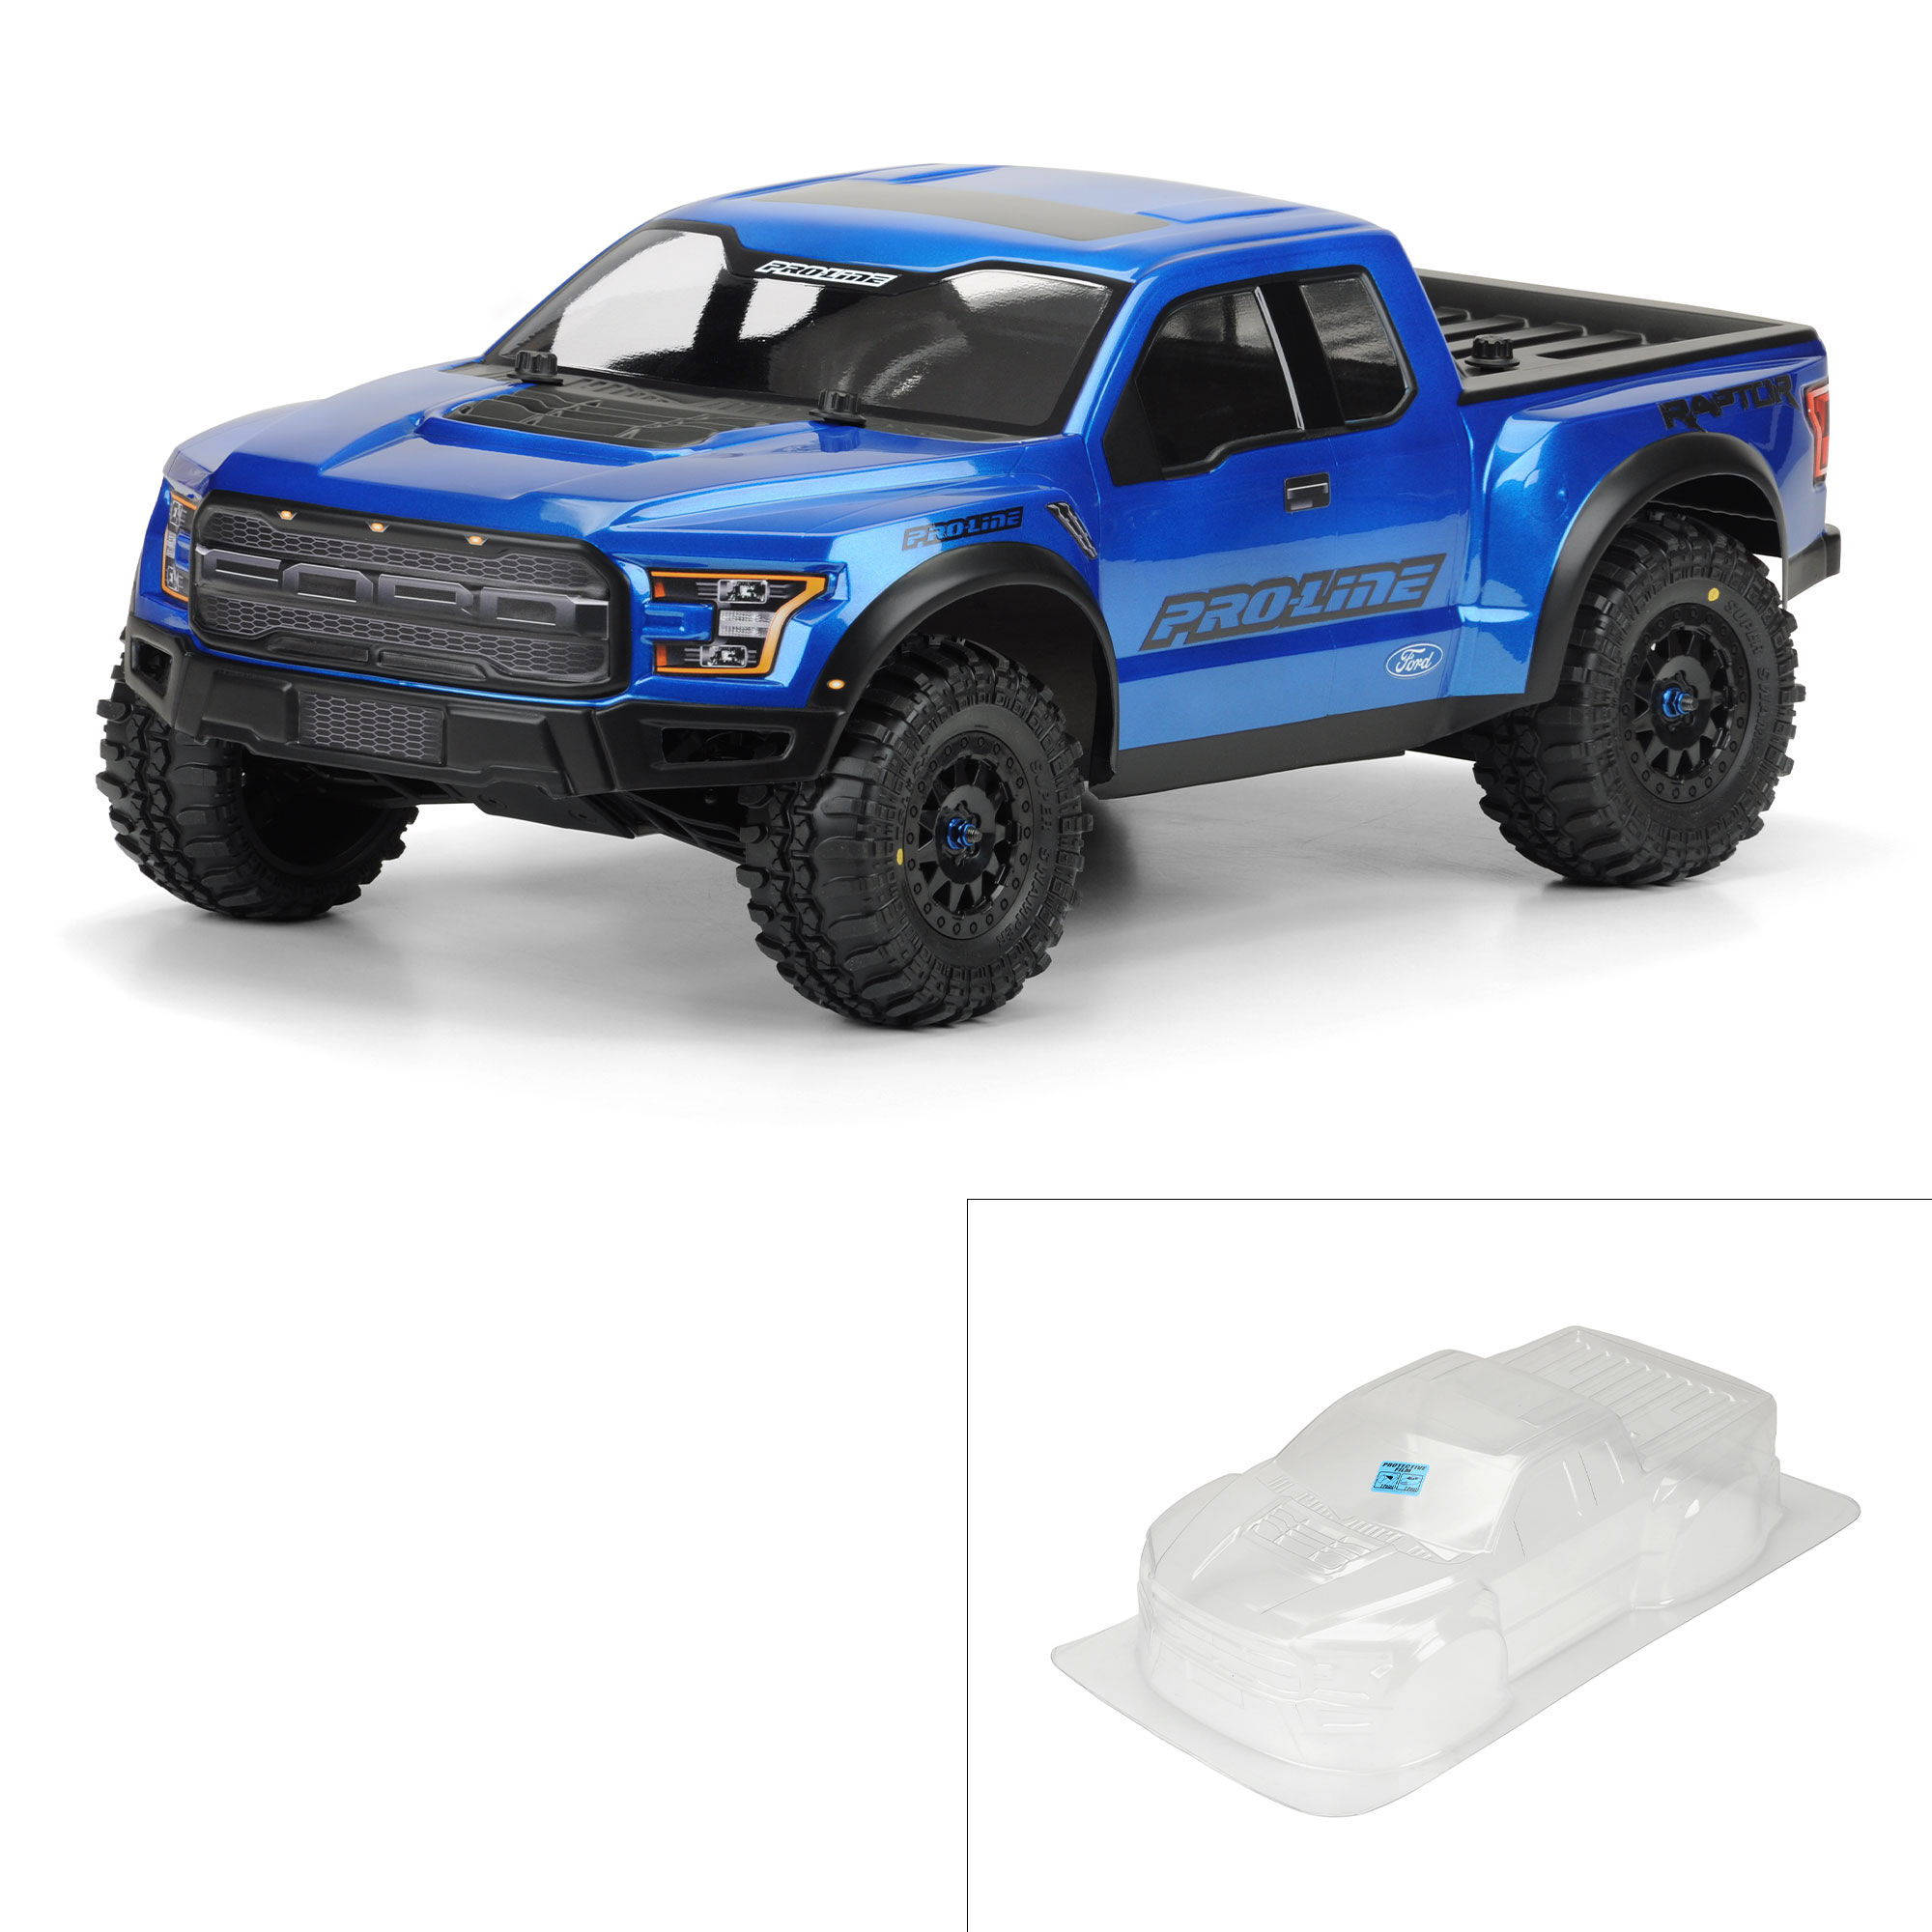 Pro-Line Racing 1/10 2017 Ford F-150 Raptor True Scale Clear Body